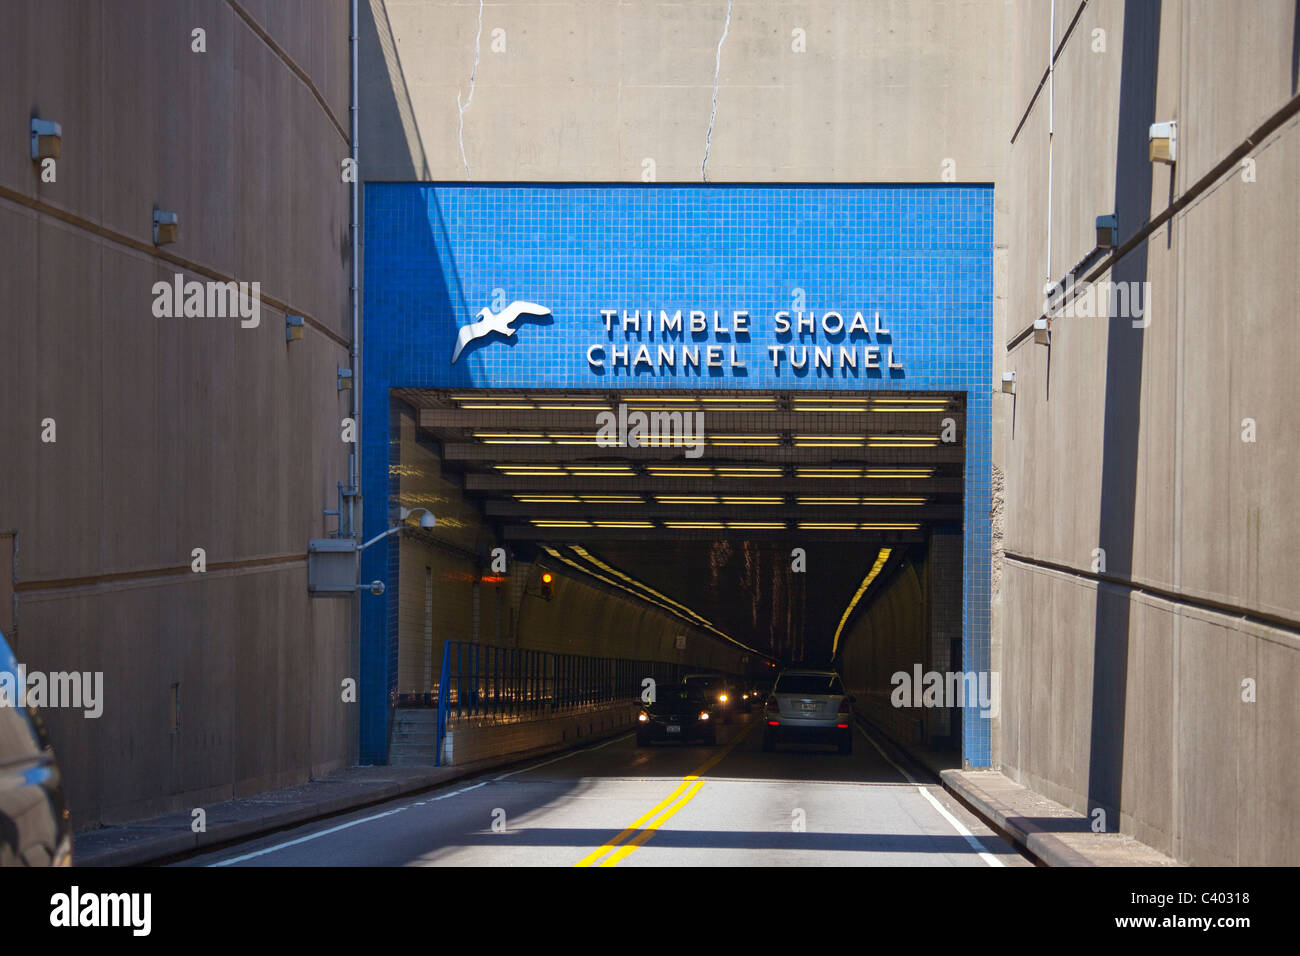 Thimble Shoal Channel Tunnel on the Chesapeake Bay Bridge and Tunnel, Virginia Stock Photo